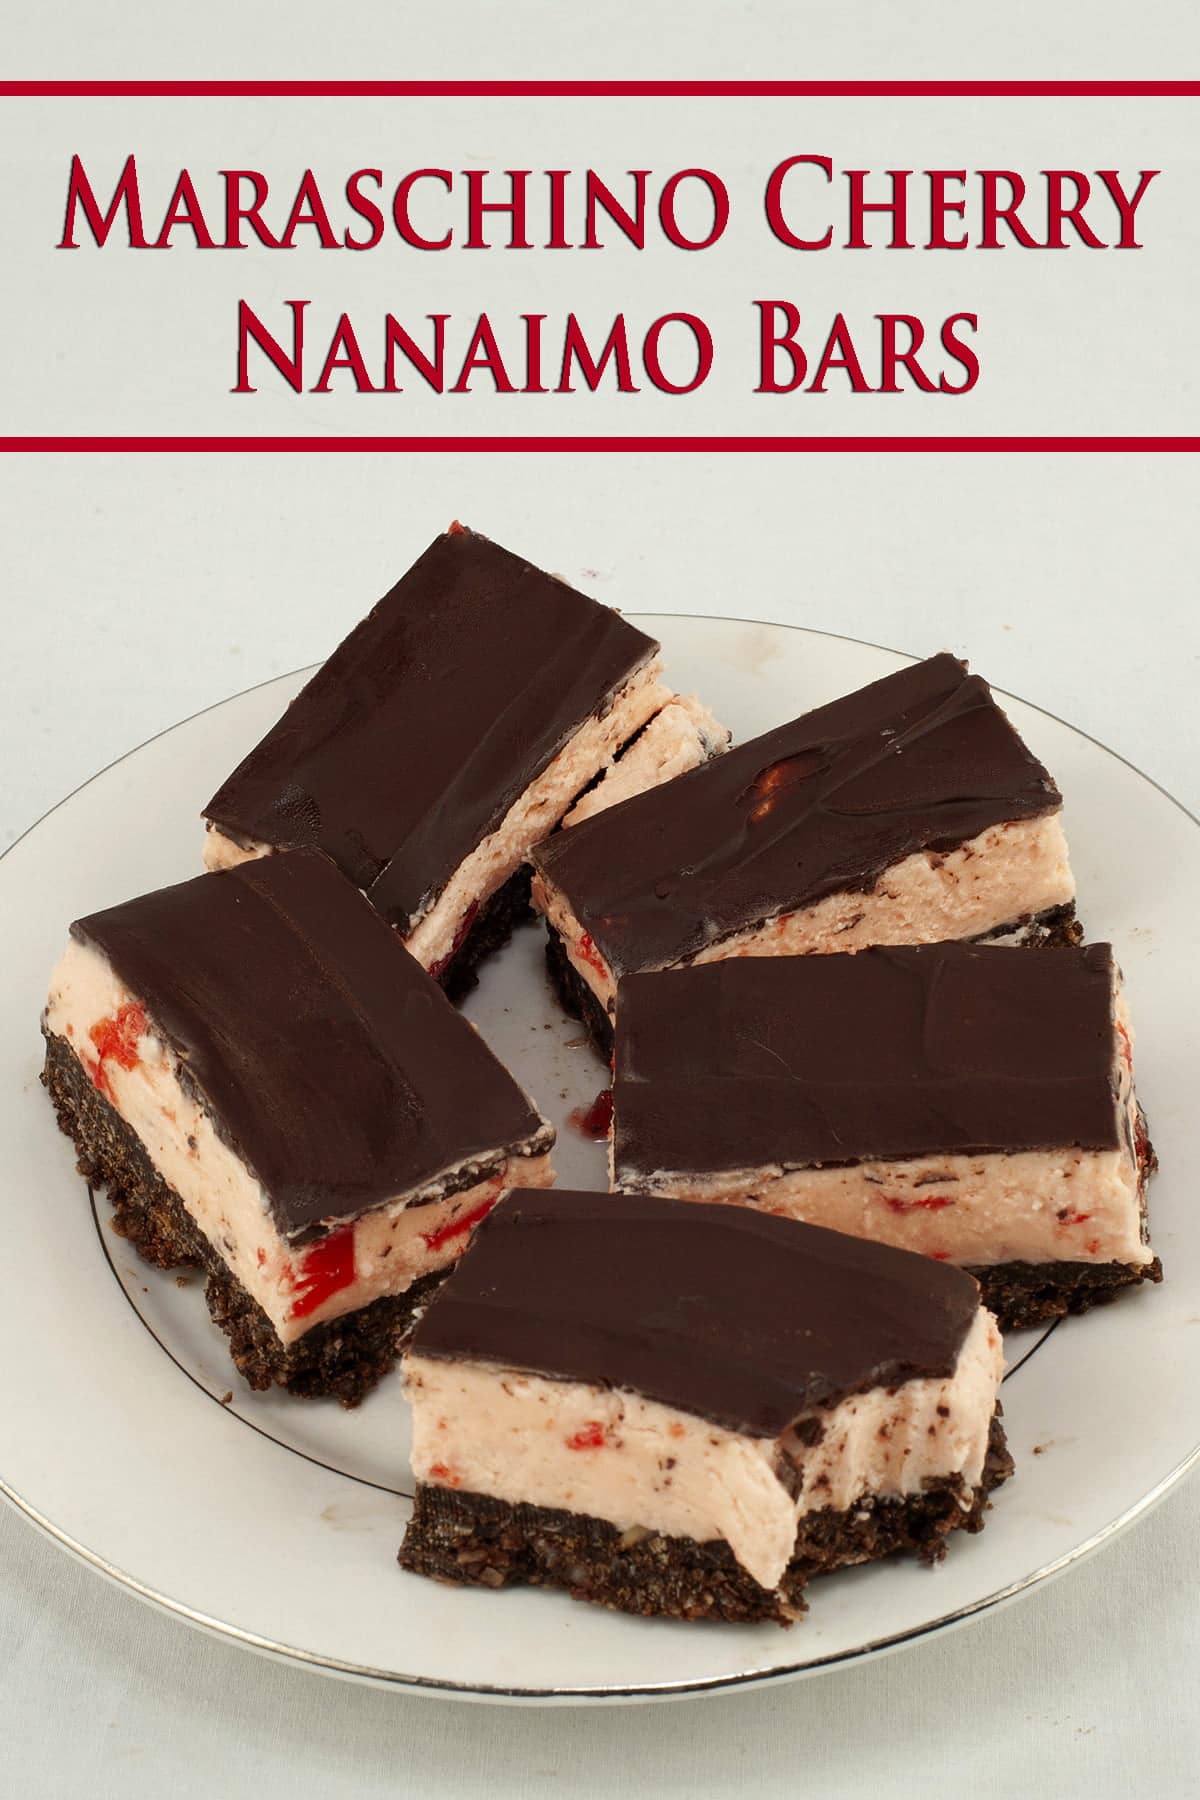 Close up view of a plate of 3 layered bars. The bottom layer looks like a brownie, the middle is a thick pink buttercream with bits of cherry visible, and the top is a smooth chocolate ganache. Maraschino Cherry Nanaimo Bars!